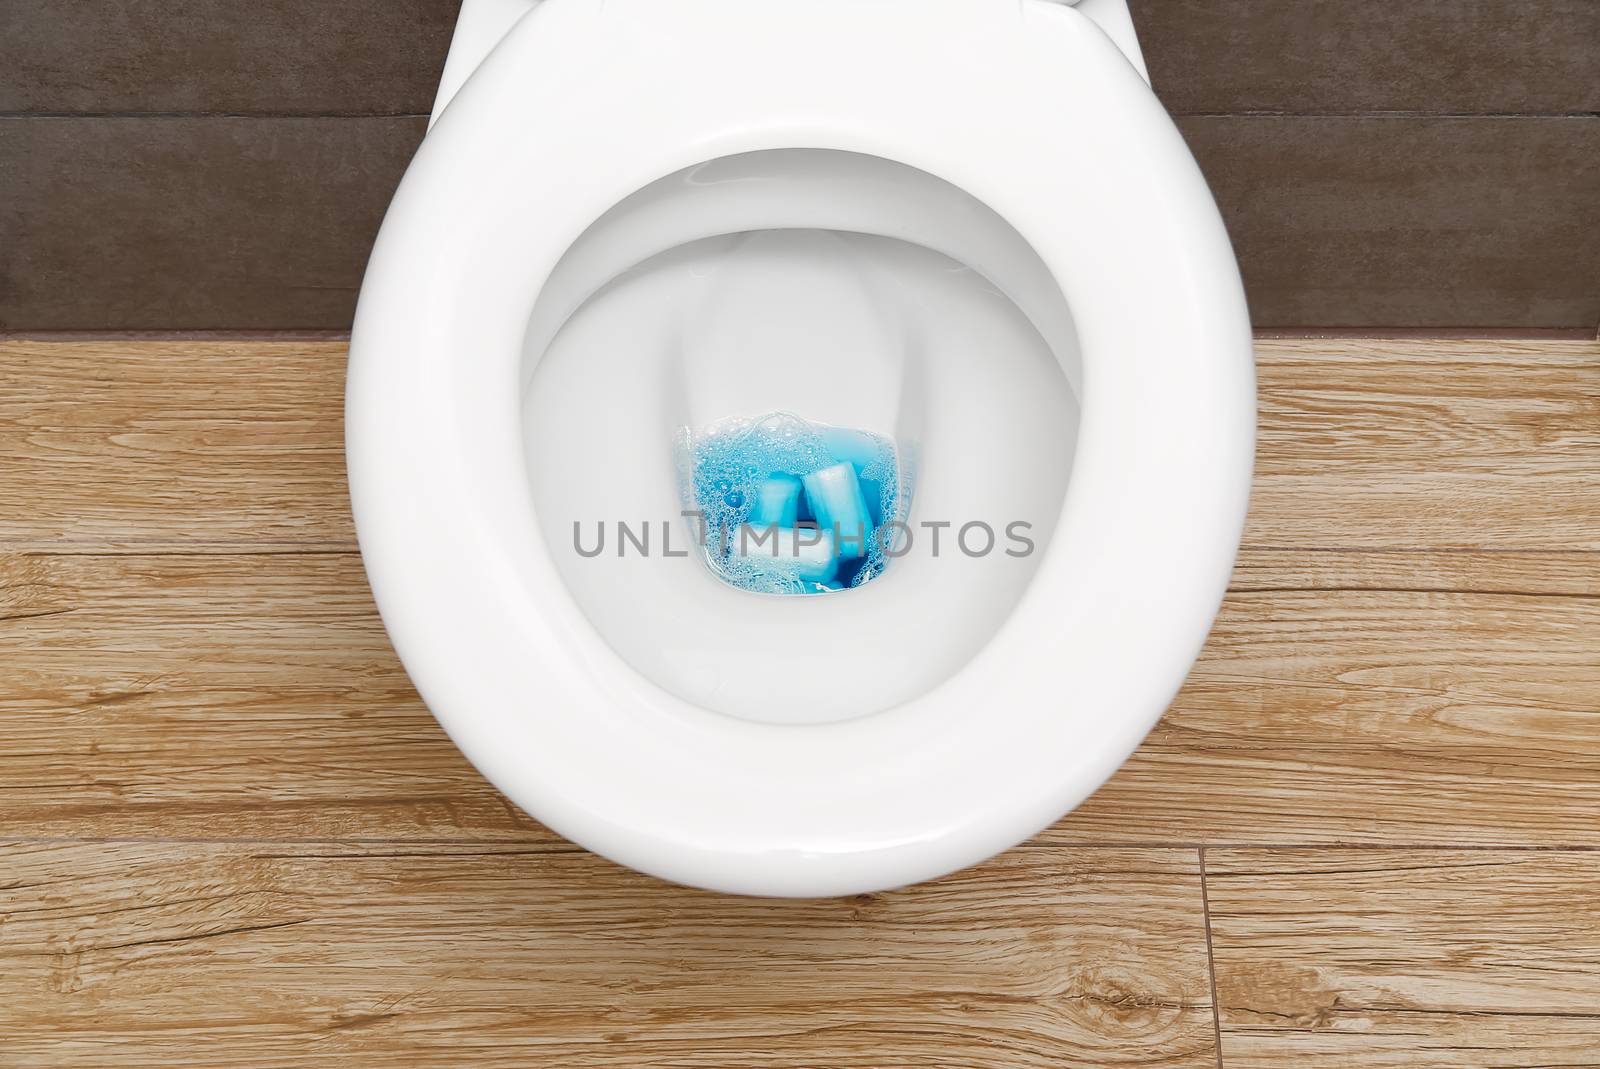 Close-up of a toilet clogged with hygiene products and toilet paper